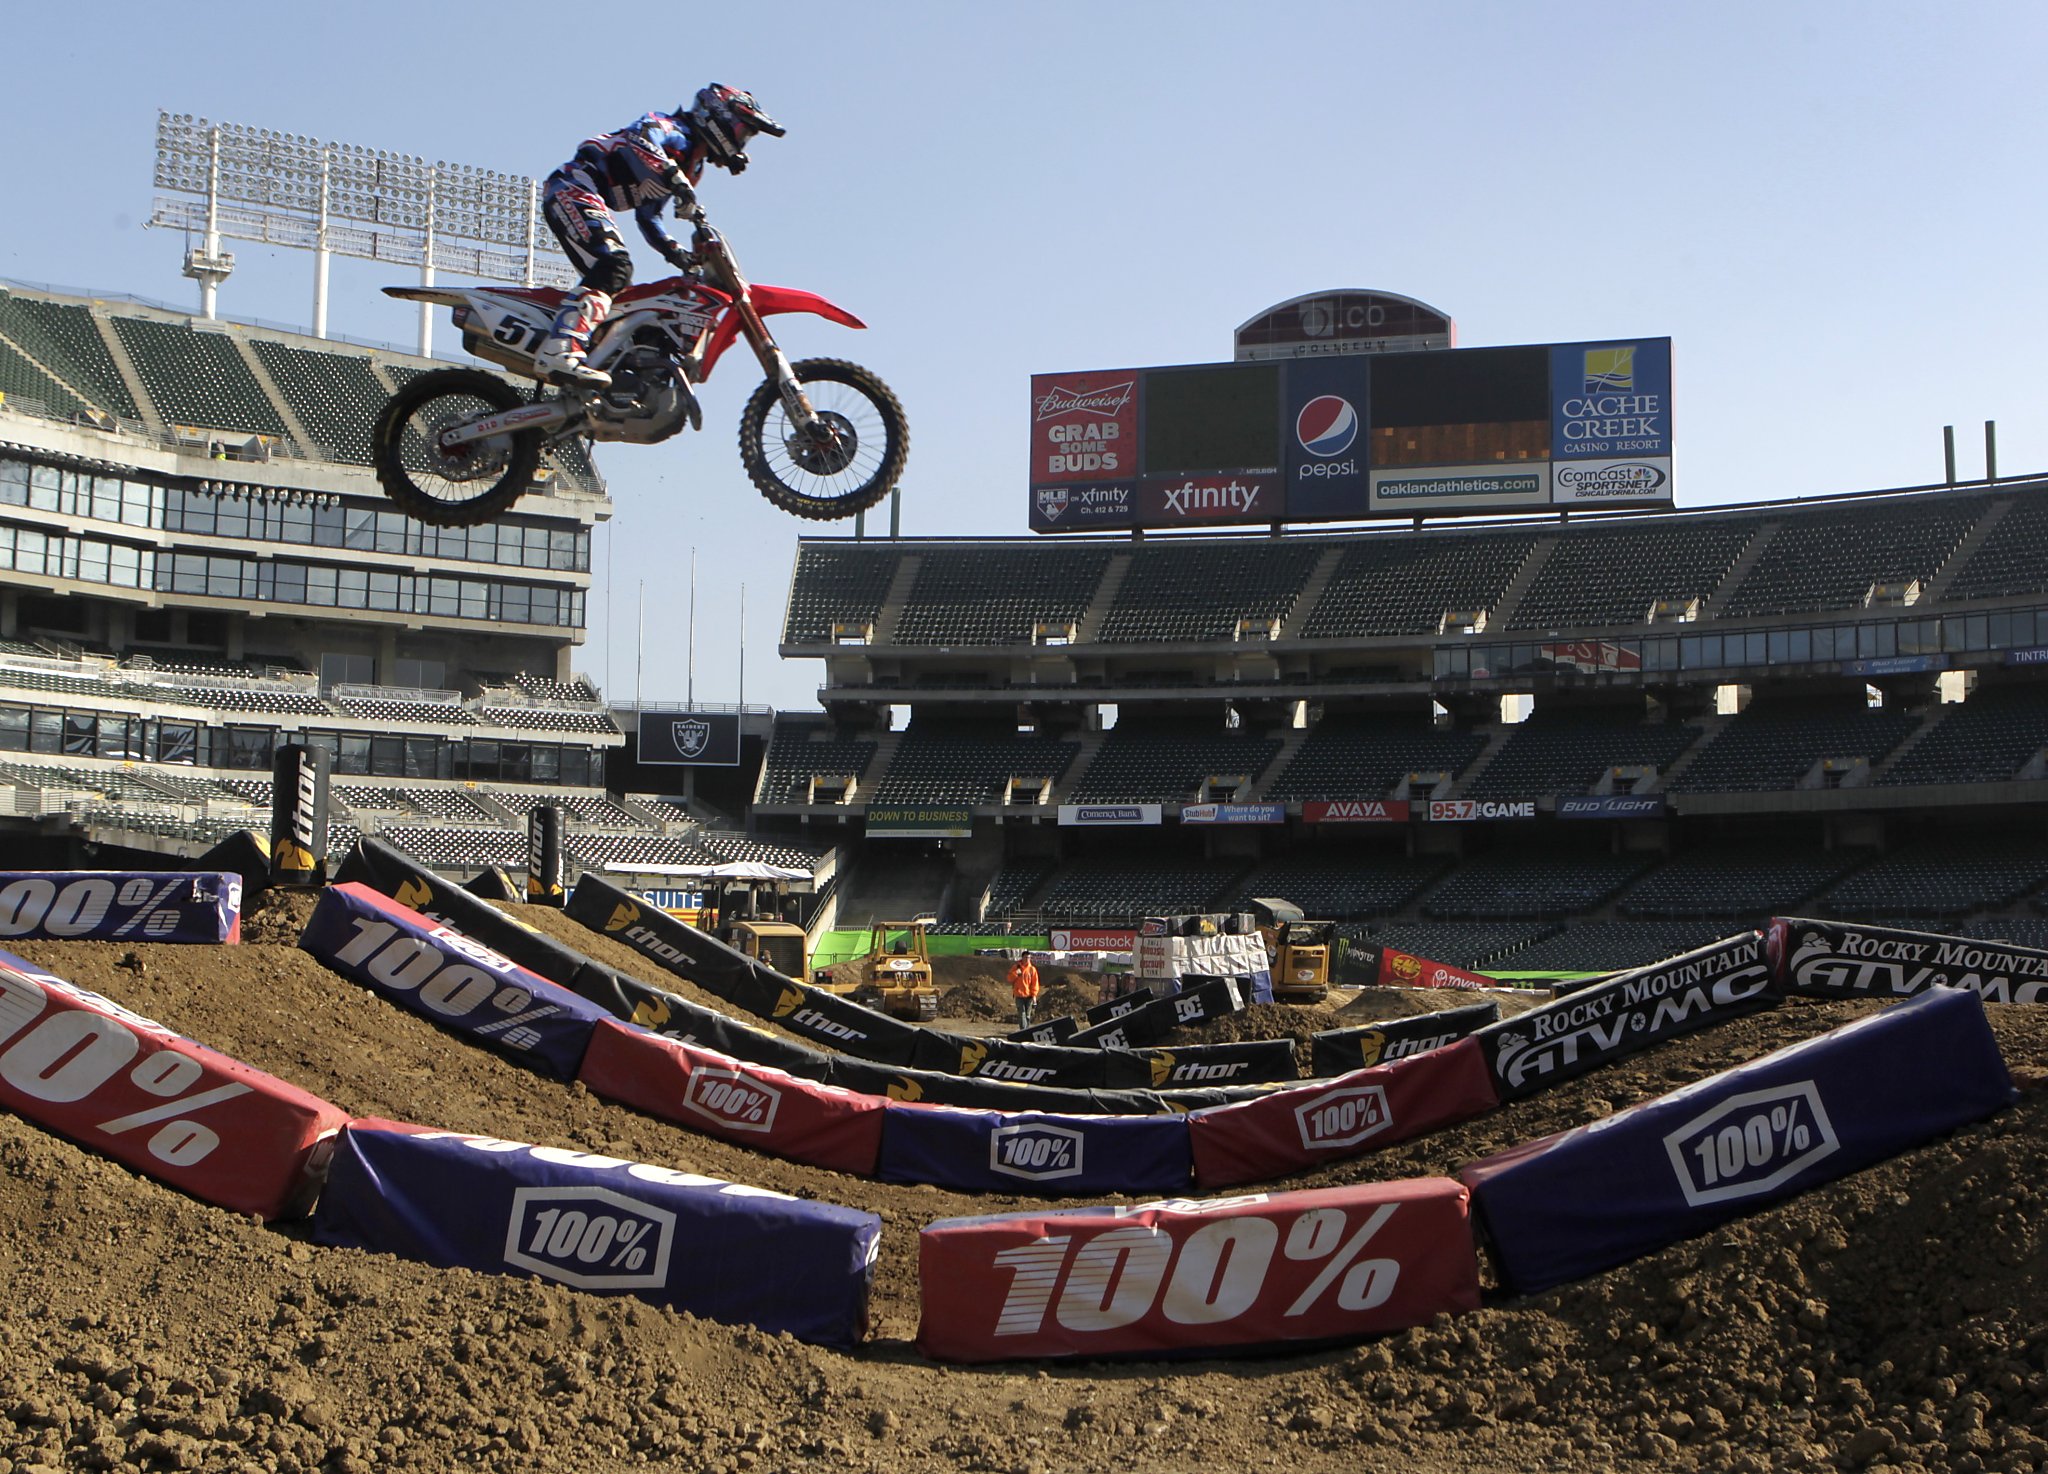 Supercross event comes to O.co Coliseum on Saturday